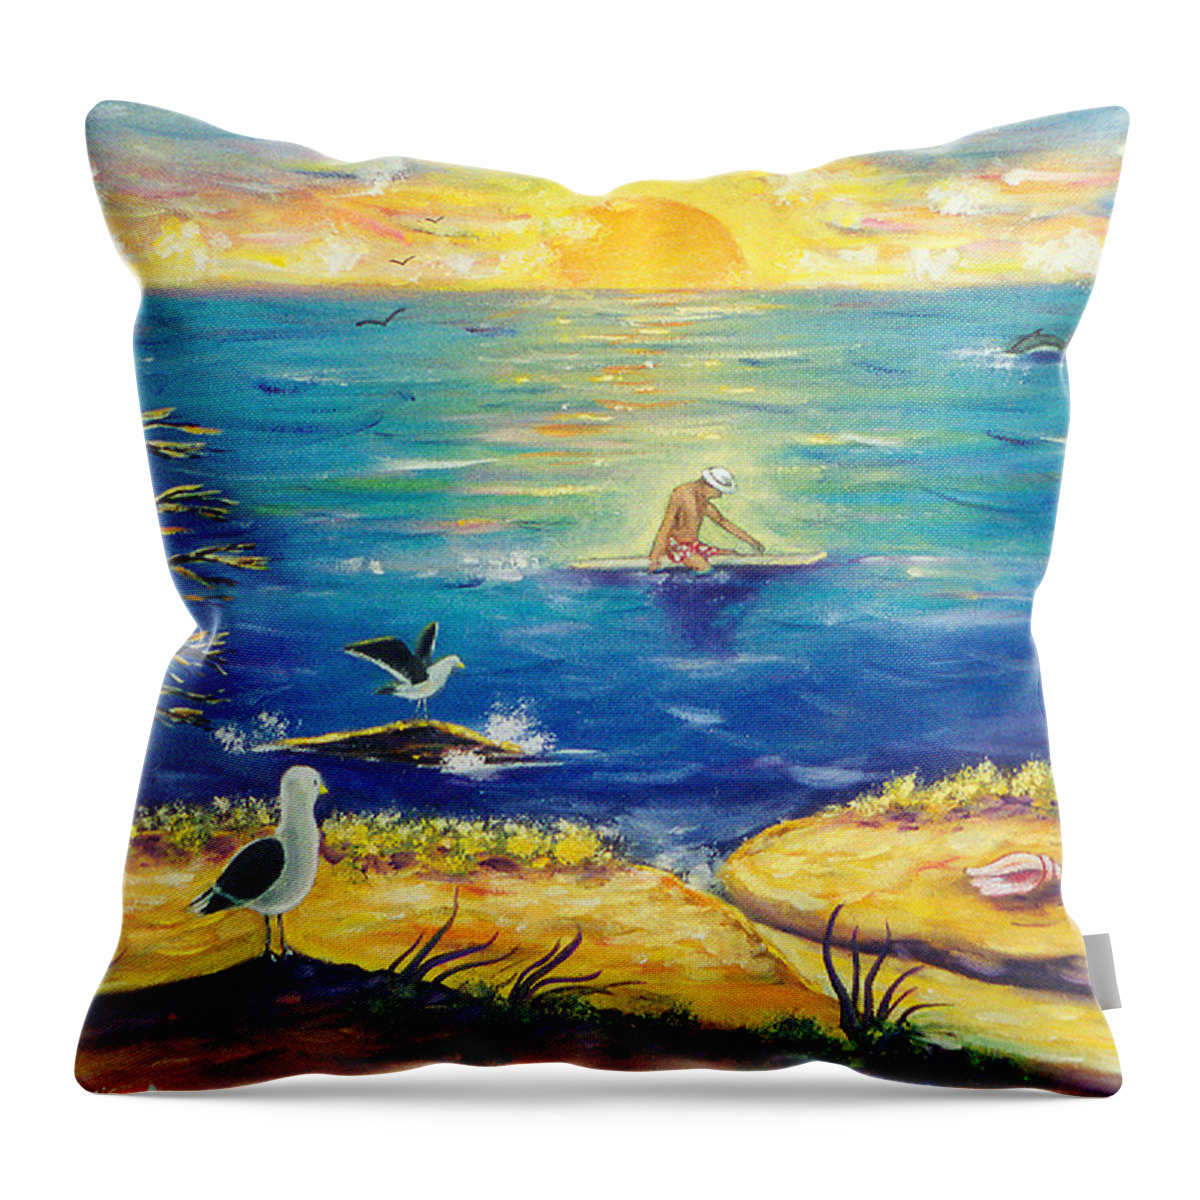 Serenity Throw Pillow featuring the painting Serenity by Diana Haronis